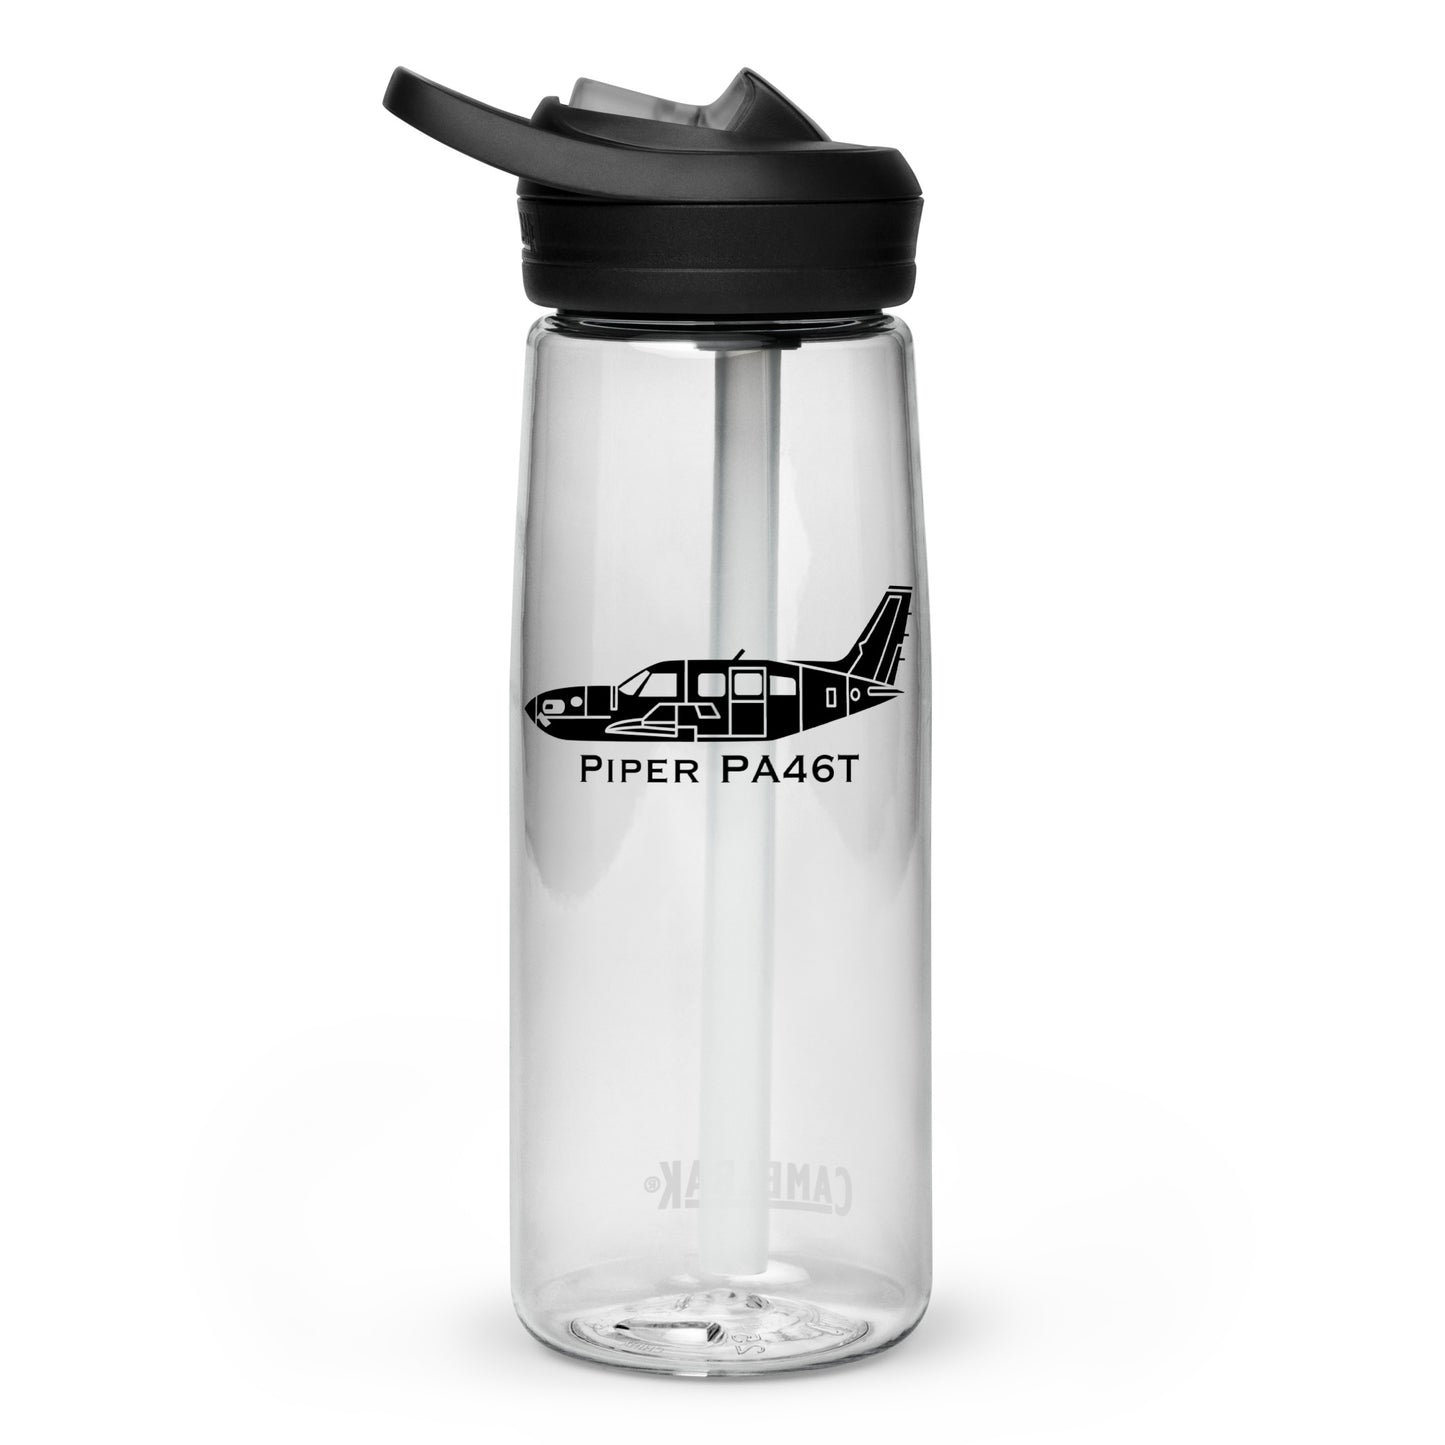 Piper PA-46T Leak Proof Sports Water Bottle | Aircraft Thermos | Travel Flask